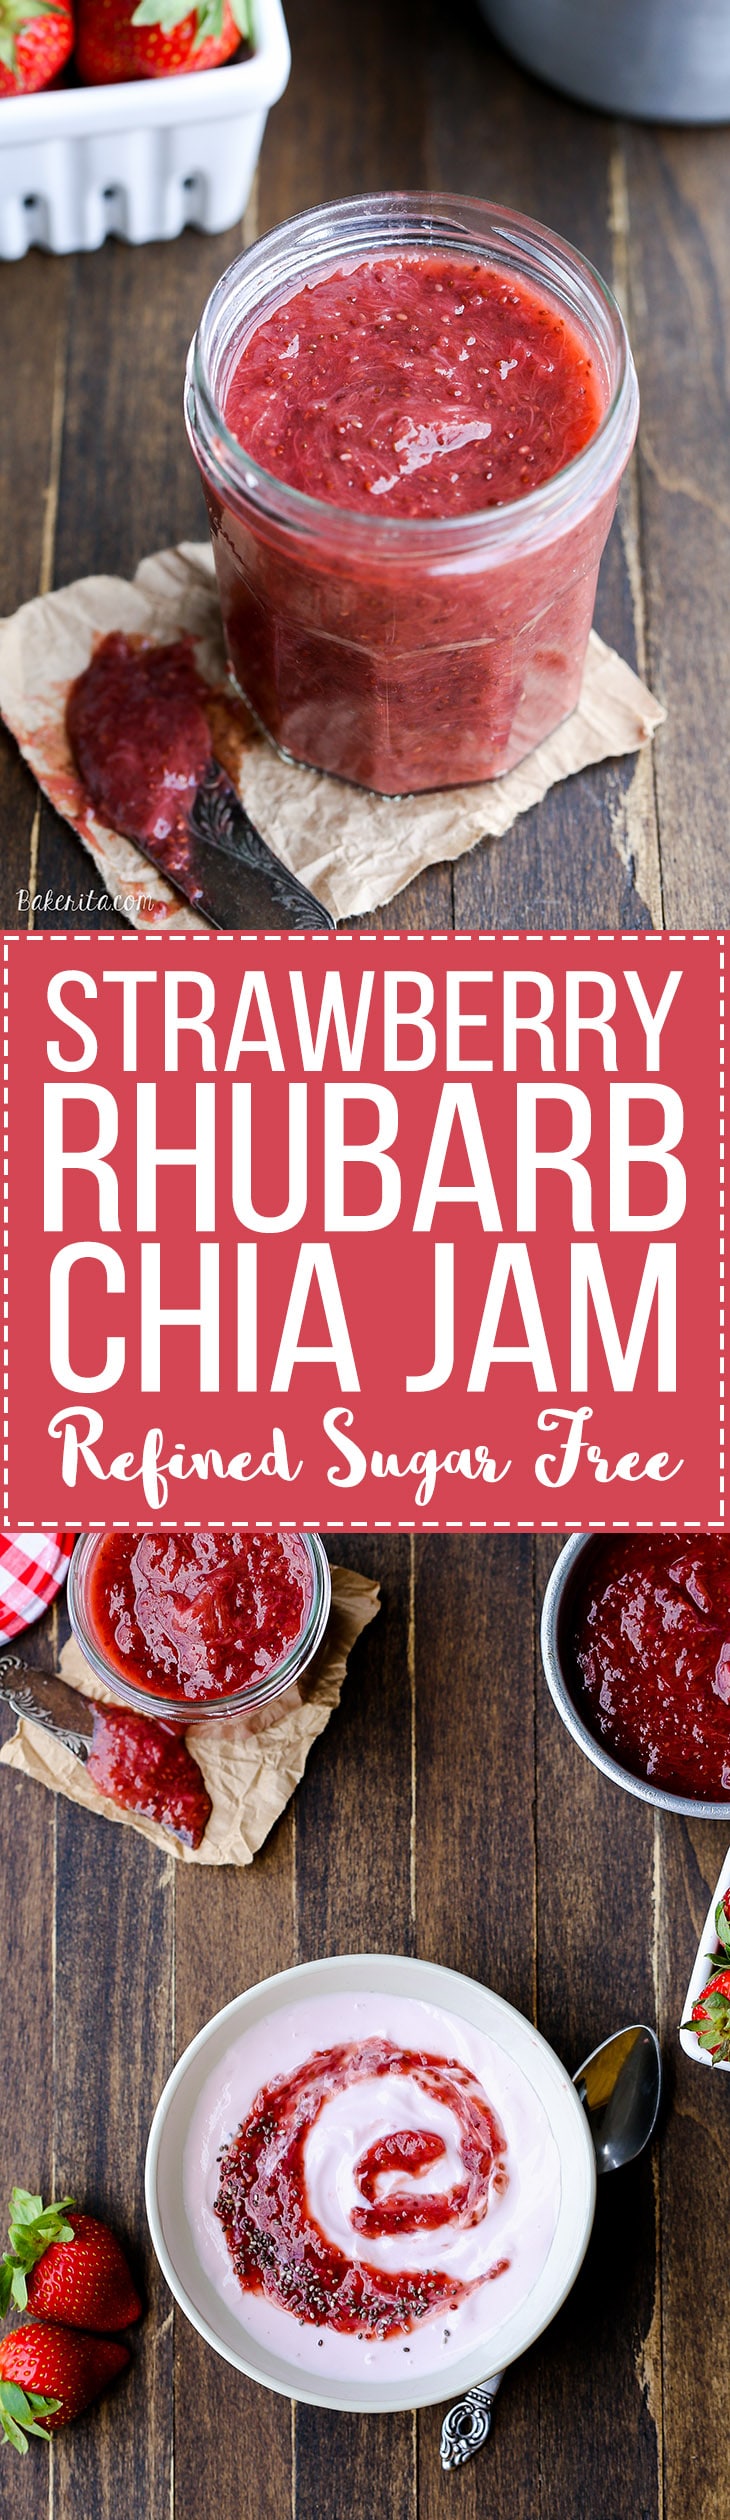 This Strawberry Rhubarb Chia Jam is refined sugar free and made without pectin - it uses chia seeds as the thickener! This easy refrigerator jam is refined sugar free, vegan and Paleo-friendly.